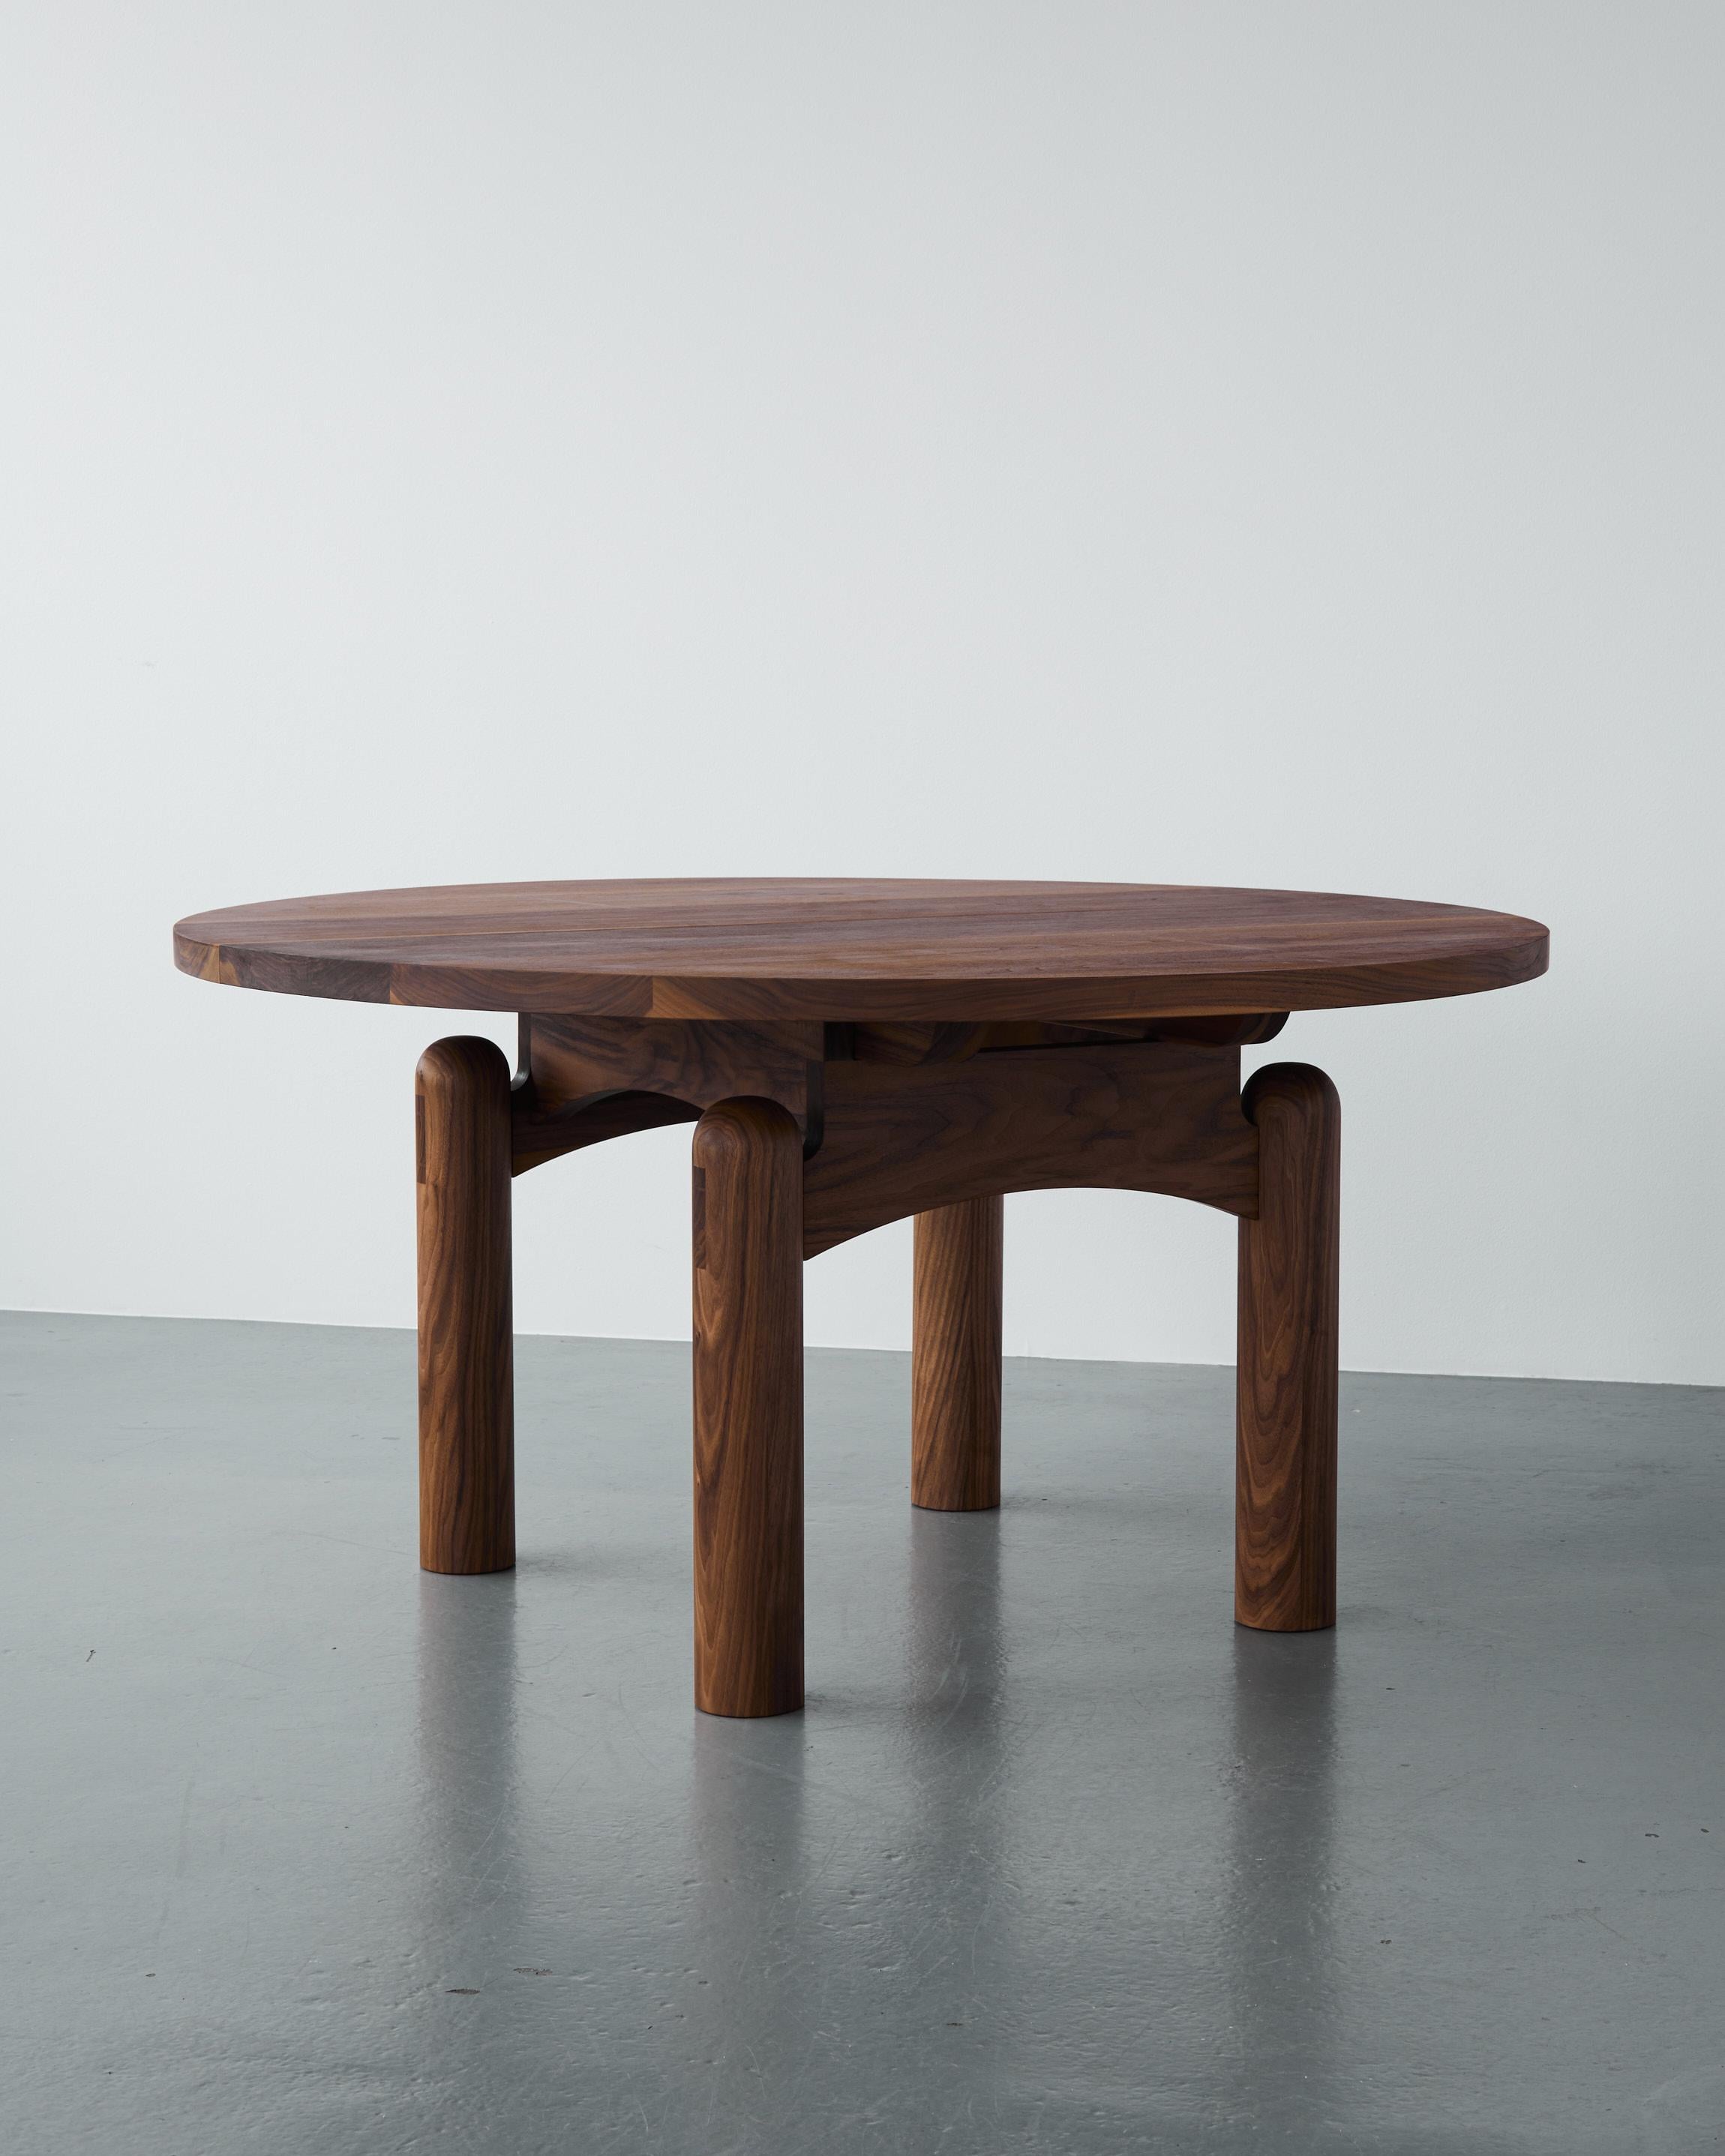 Modern Handmade Nora Dining Table, Fixed Ø150cm - Walnut - by BACD studio For Sale